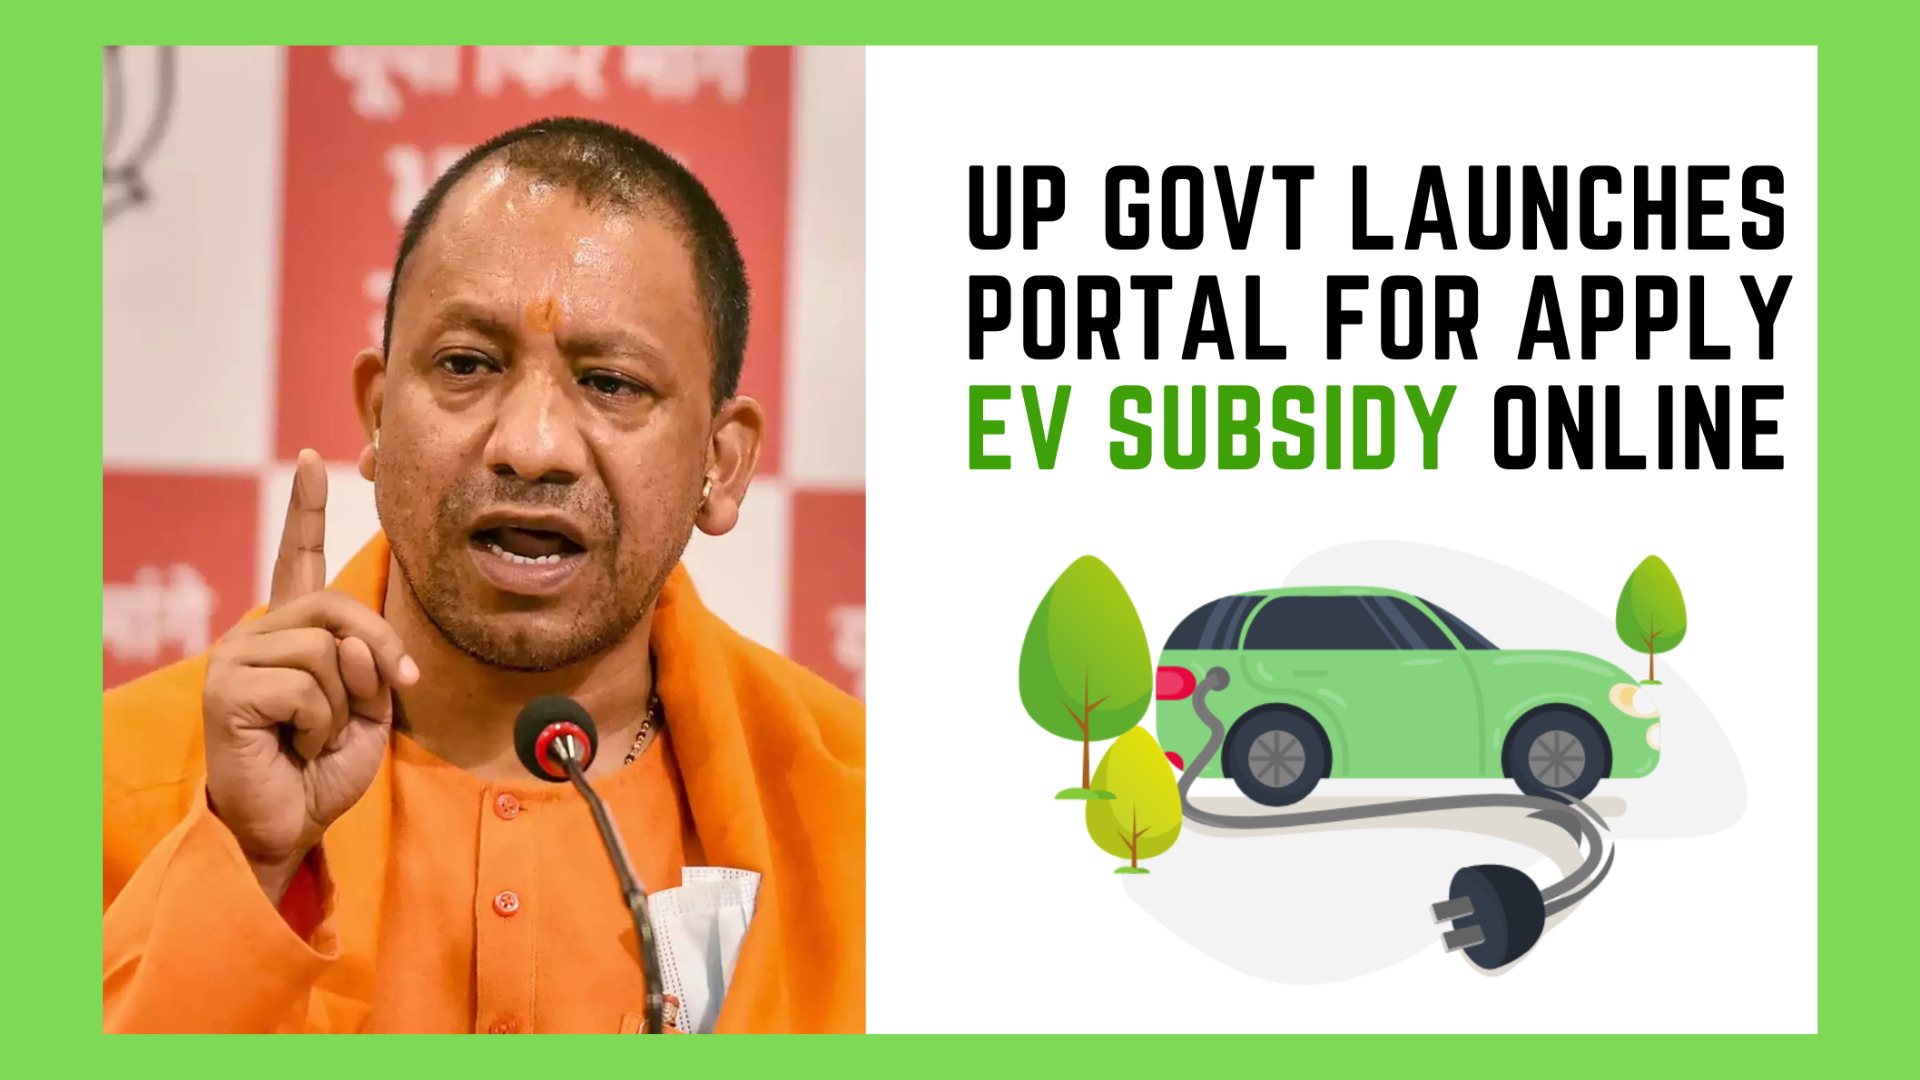 https://e-vehicleinfo.com/up-govt-launches-portal-for-apply-ev-subsidy-online/